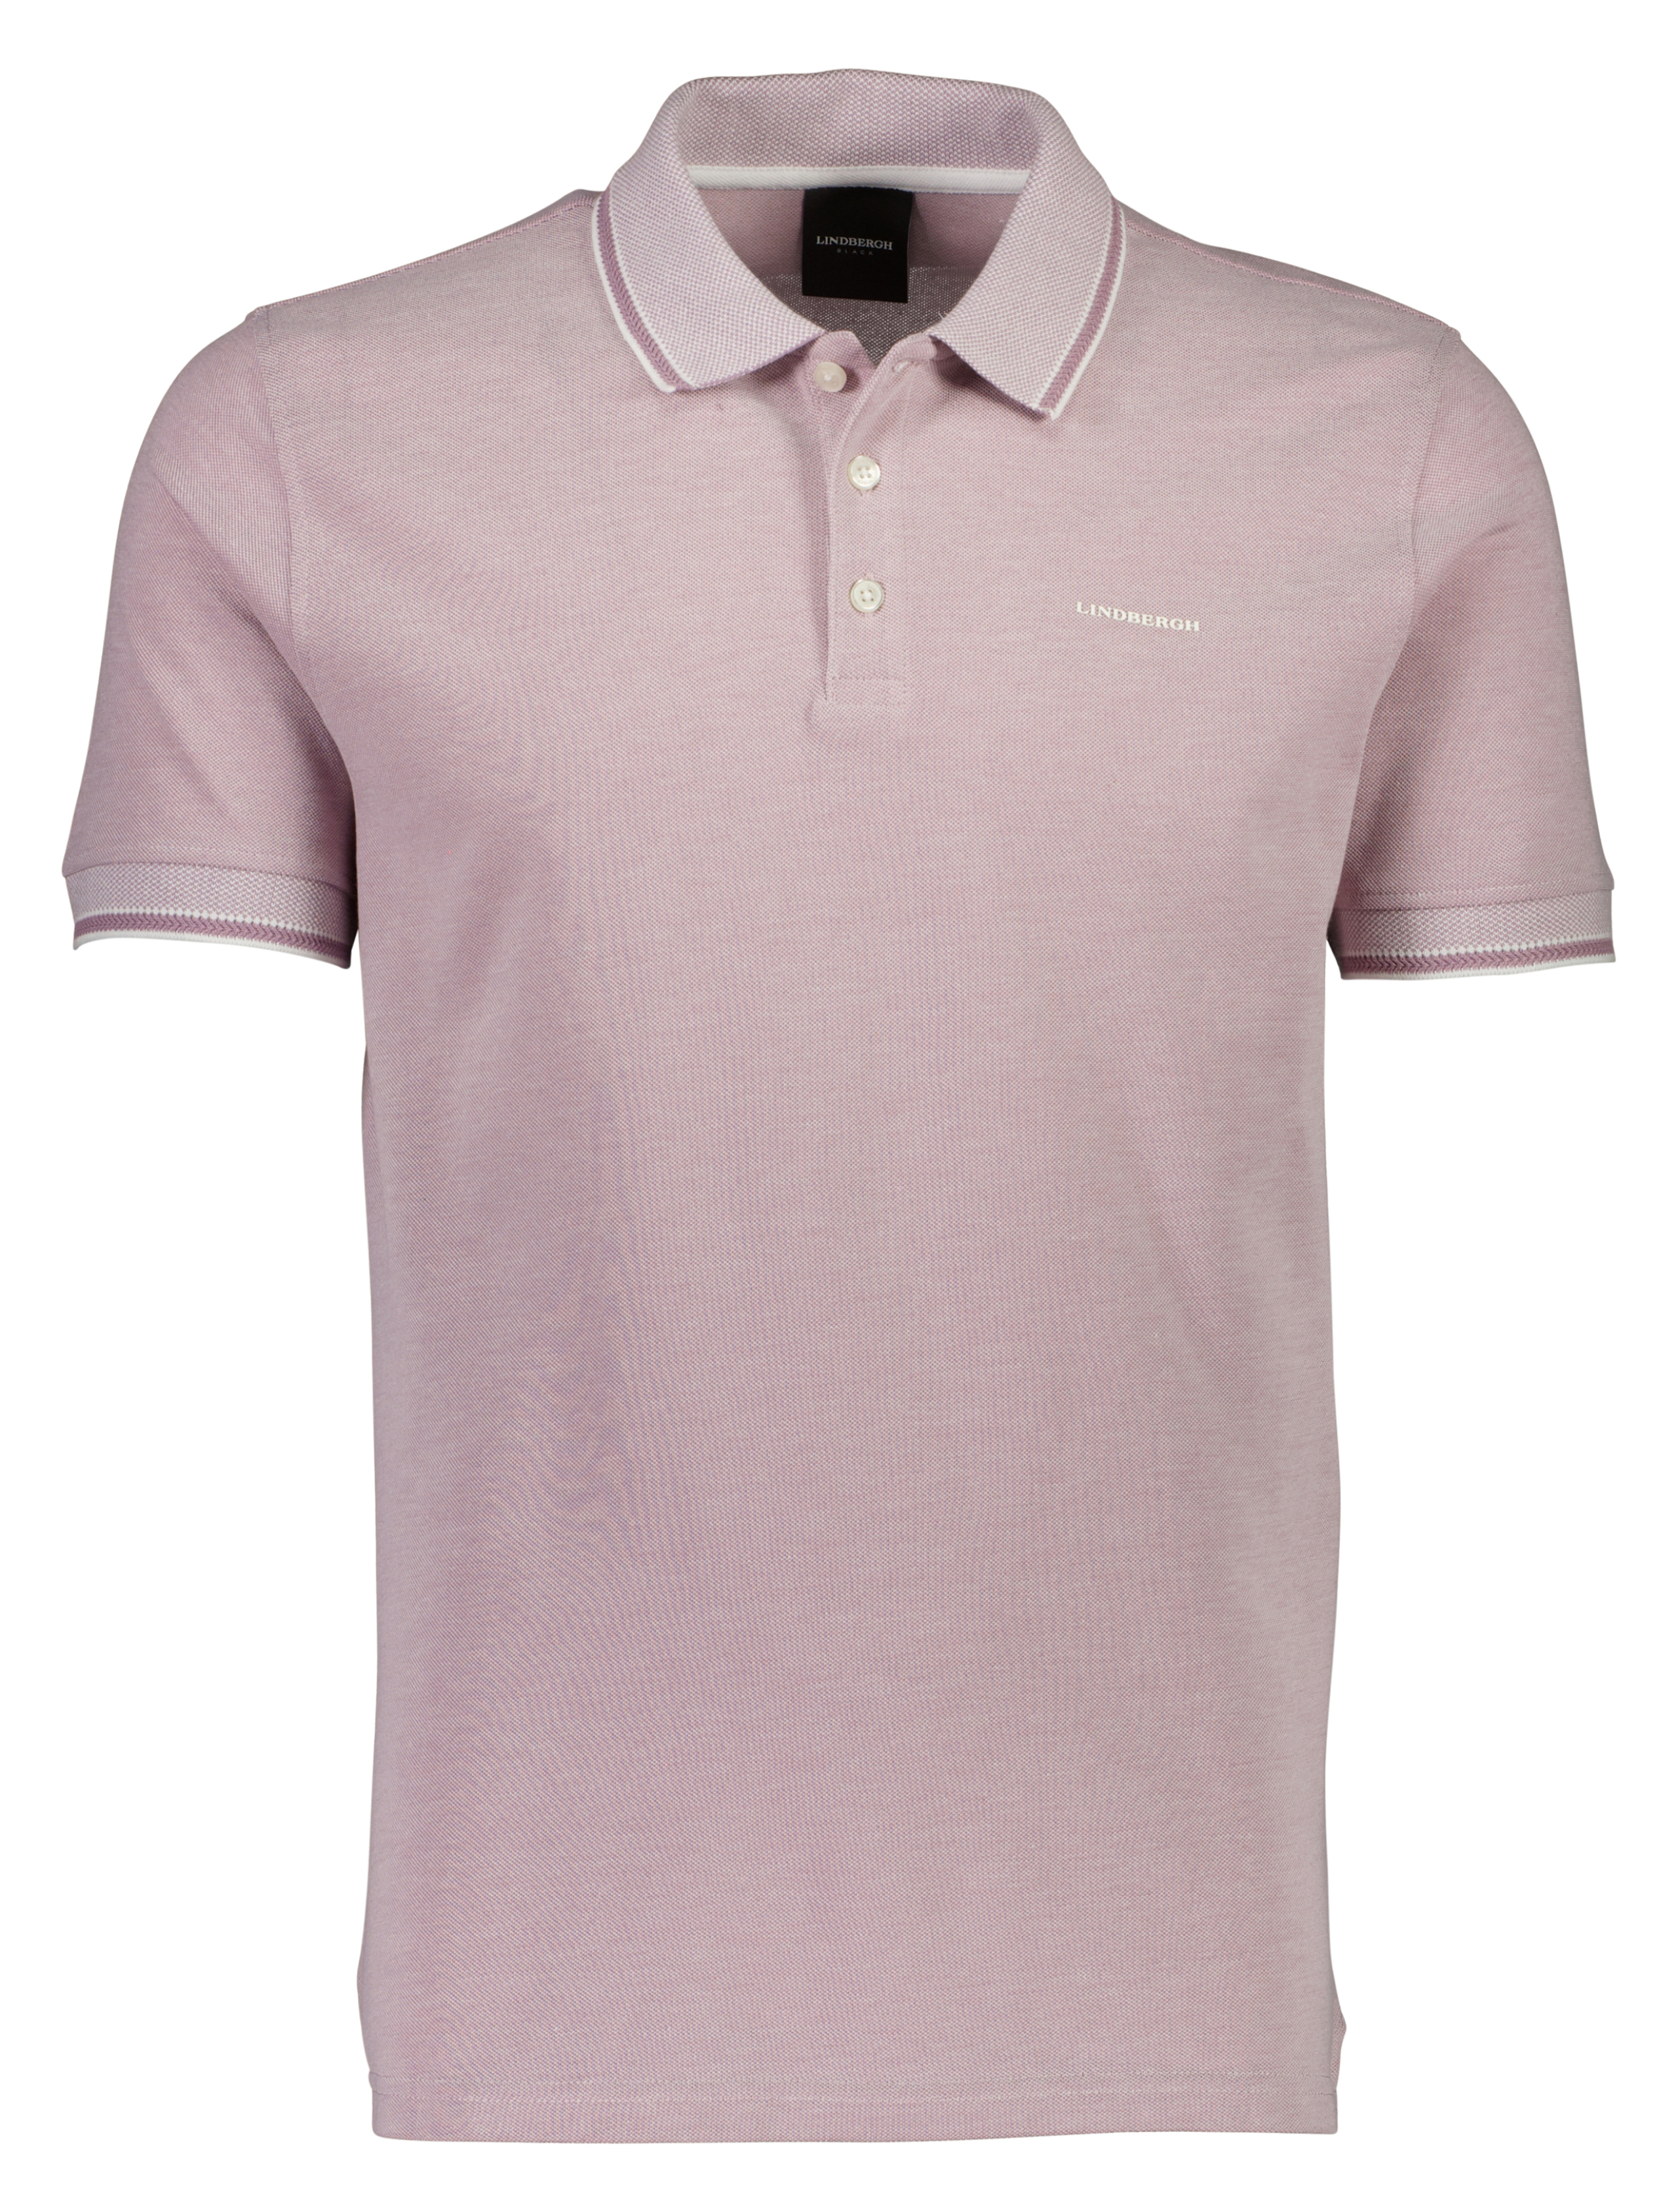 Lindbergh Polo shirt red / dusty pink